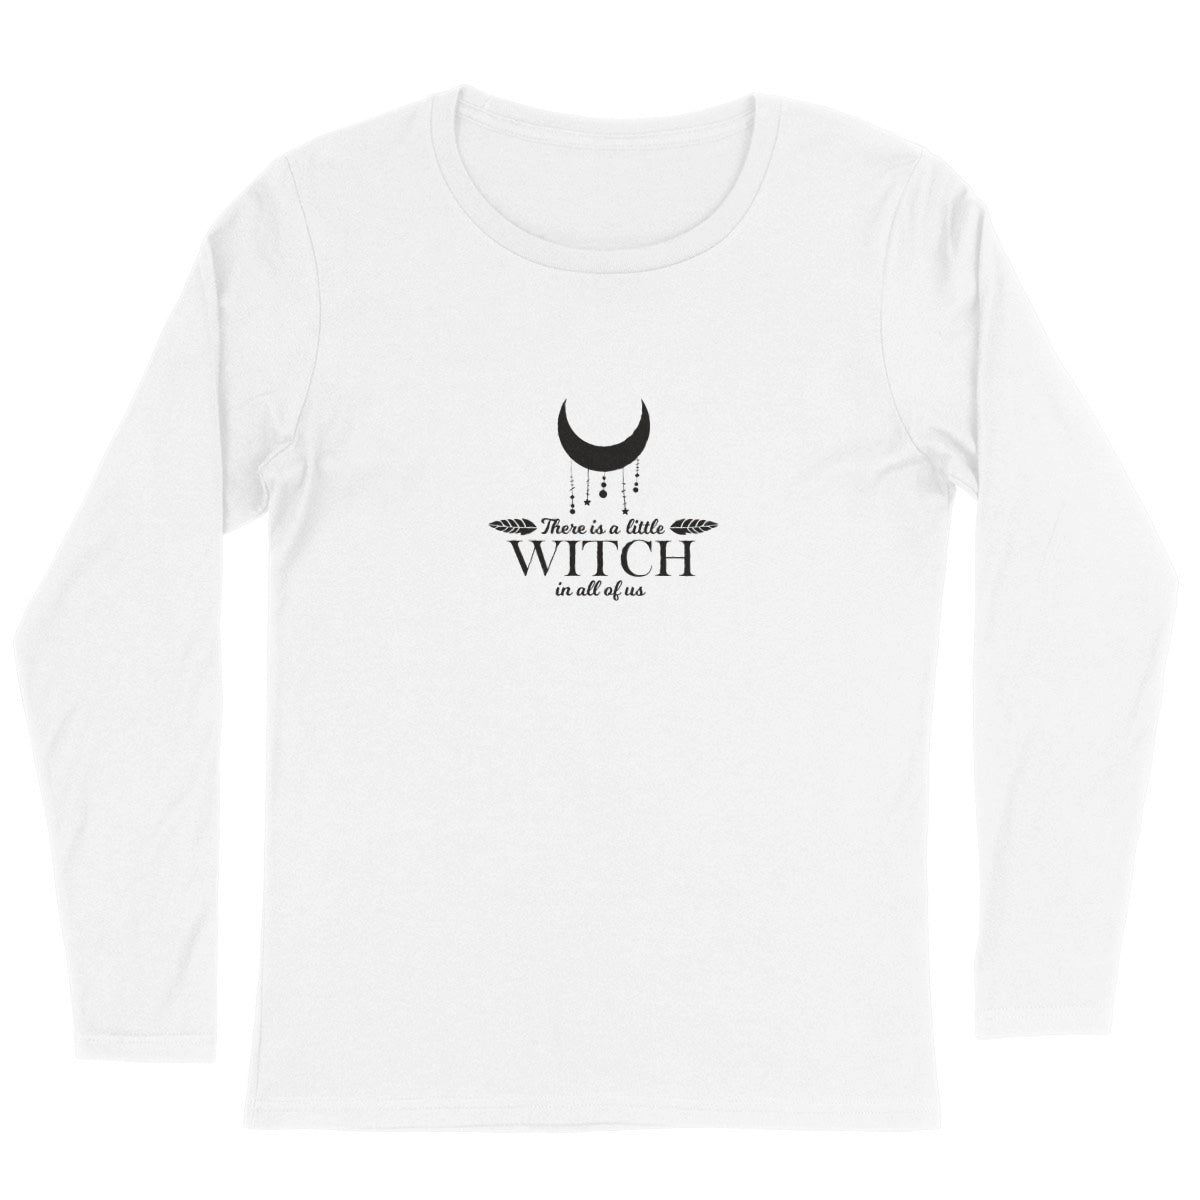 WITCH IN ALL OF US Organic Women's Long Sleeve Tee Shirt